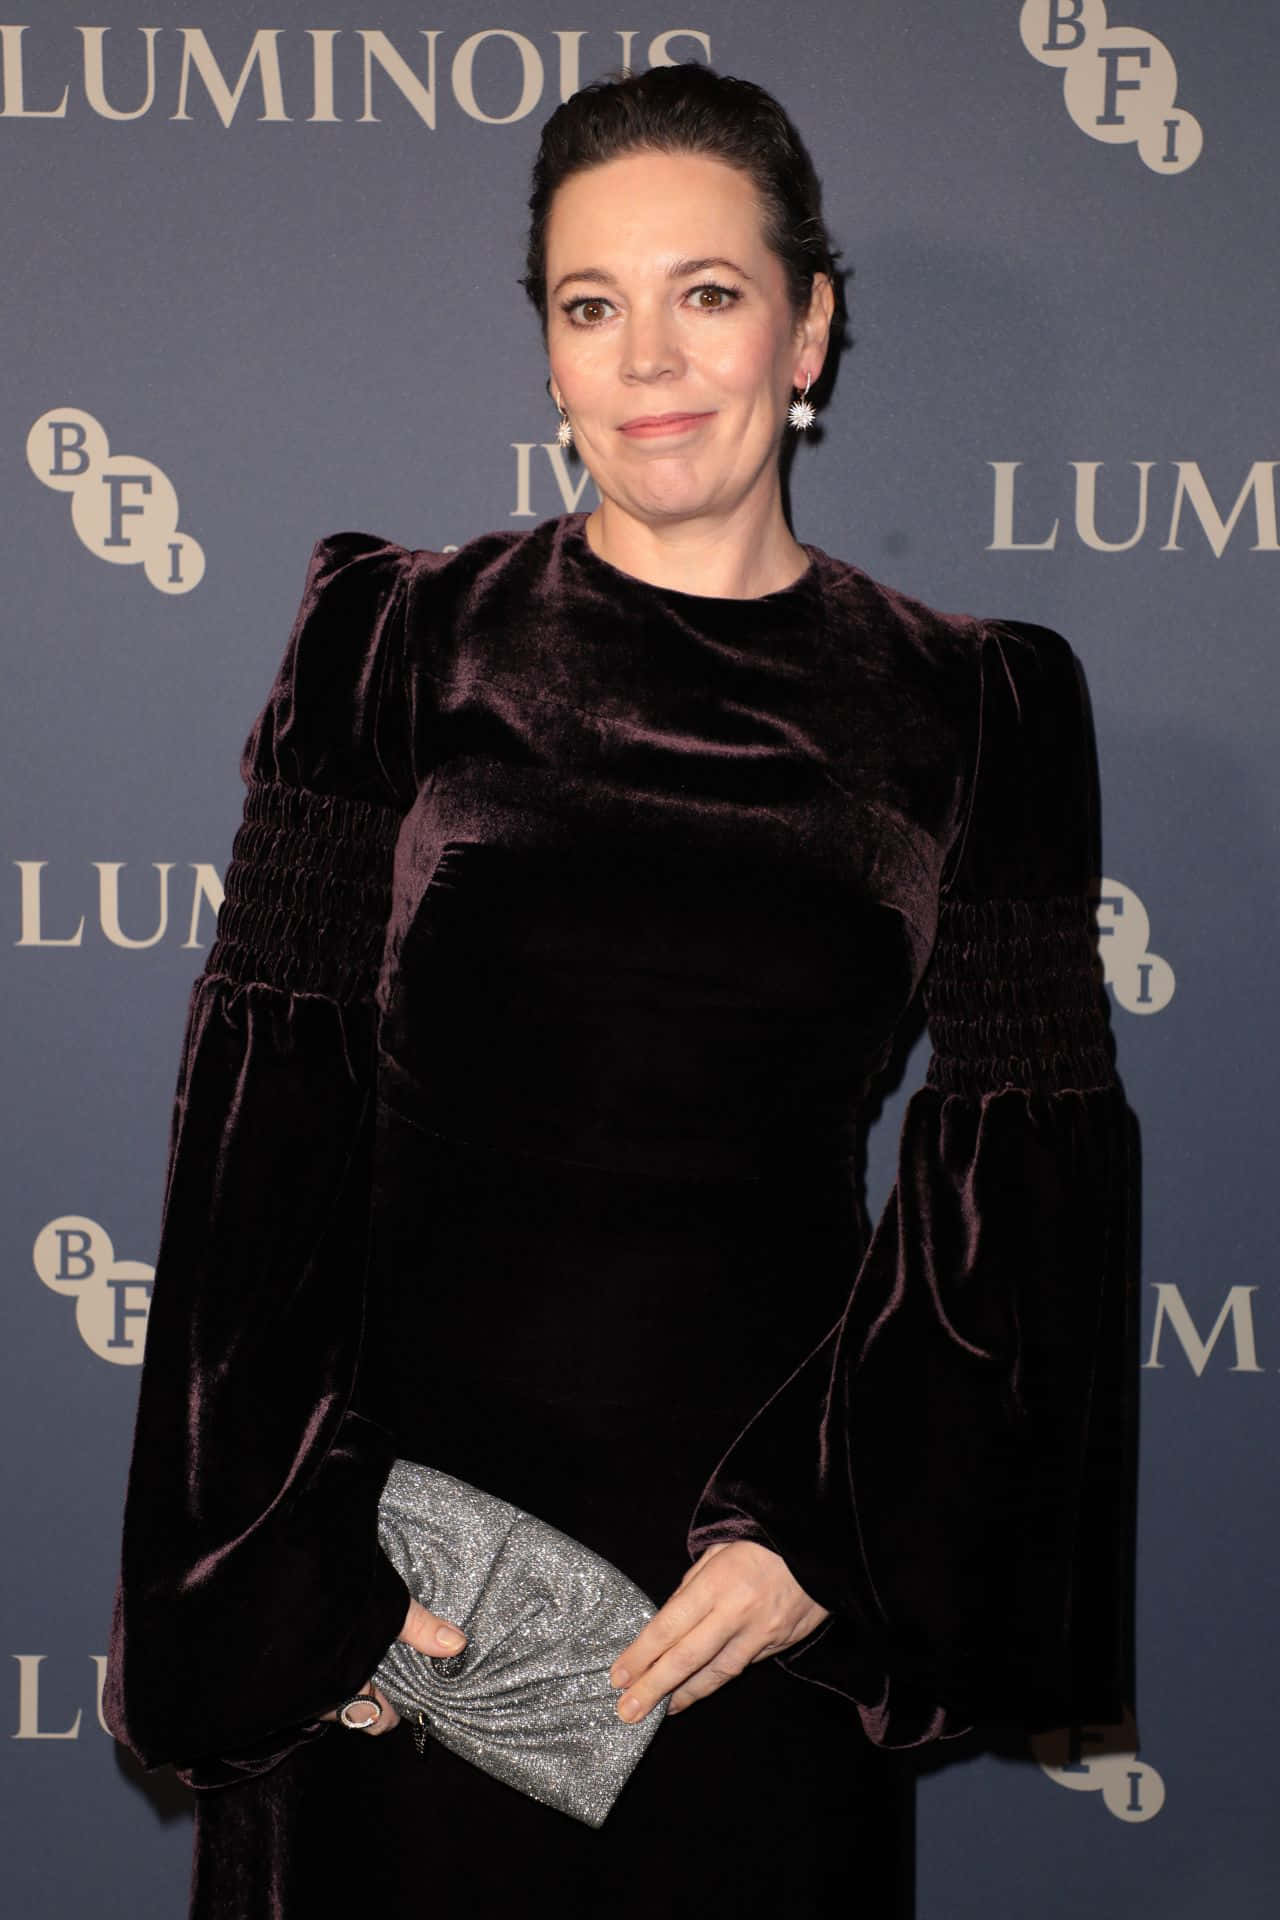 "award-winning Actress Olivia Colman In An Elegant Evening Gown At A Red Carpet Event" Wallpaper